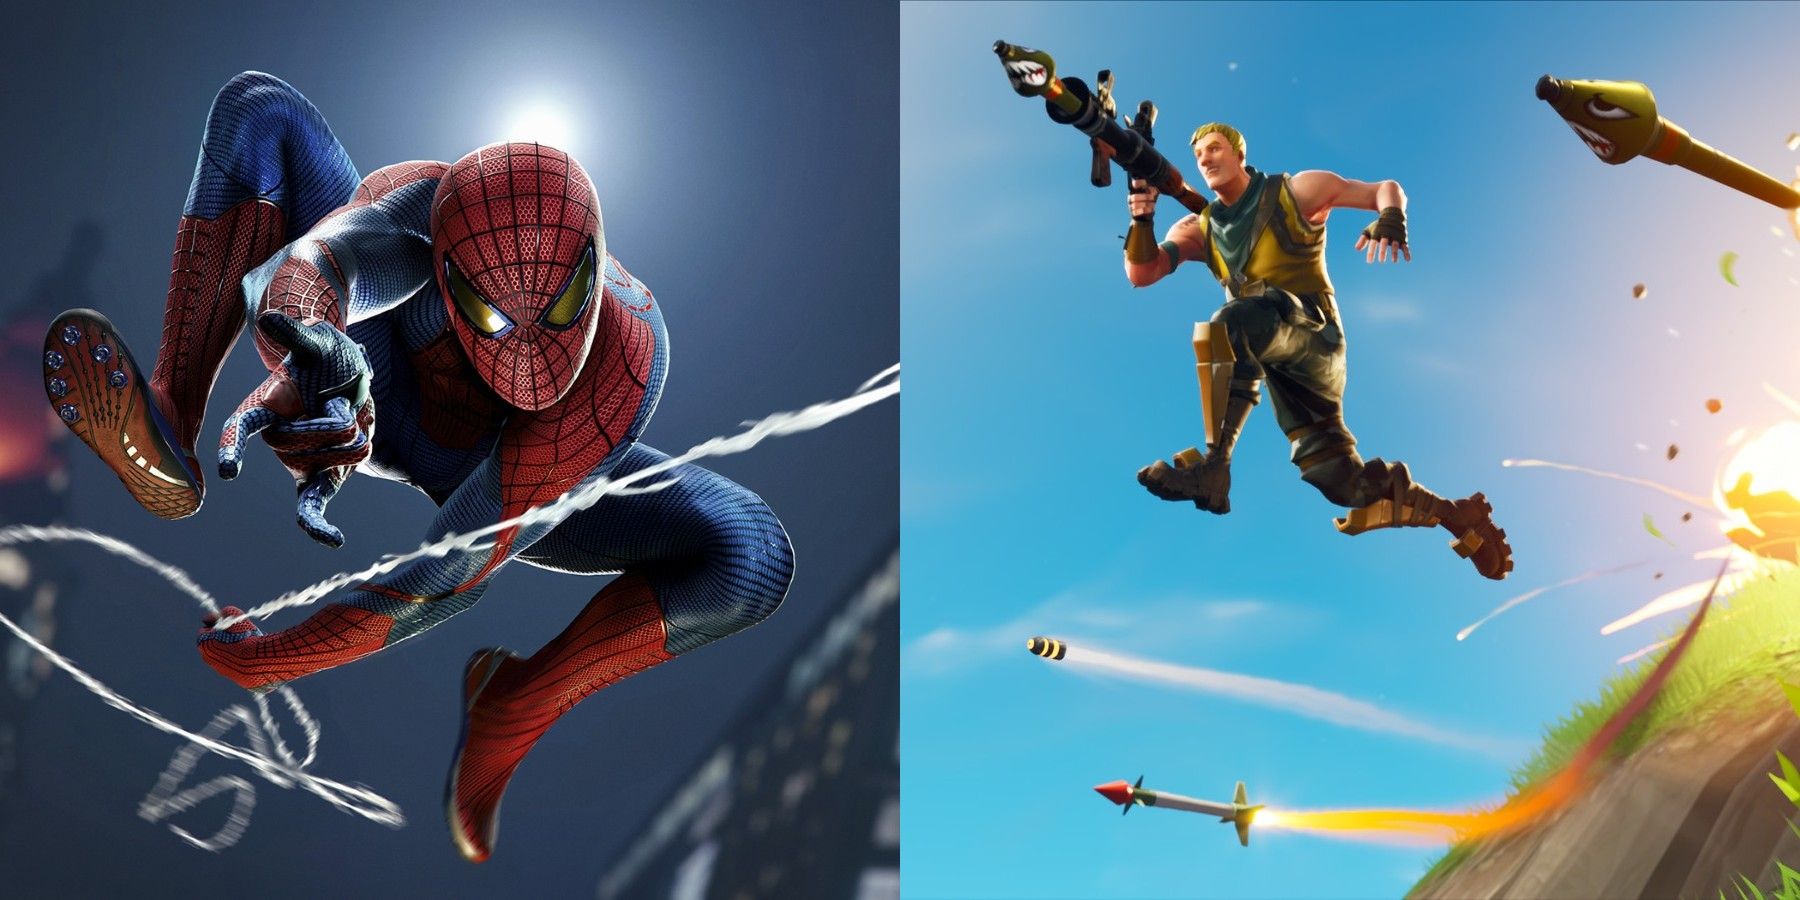 Rumor_ Fortnite Spider-Man Crossover Could Be in the Works